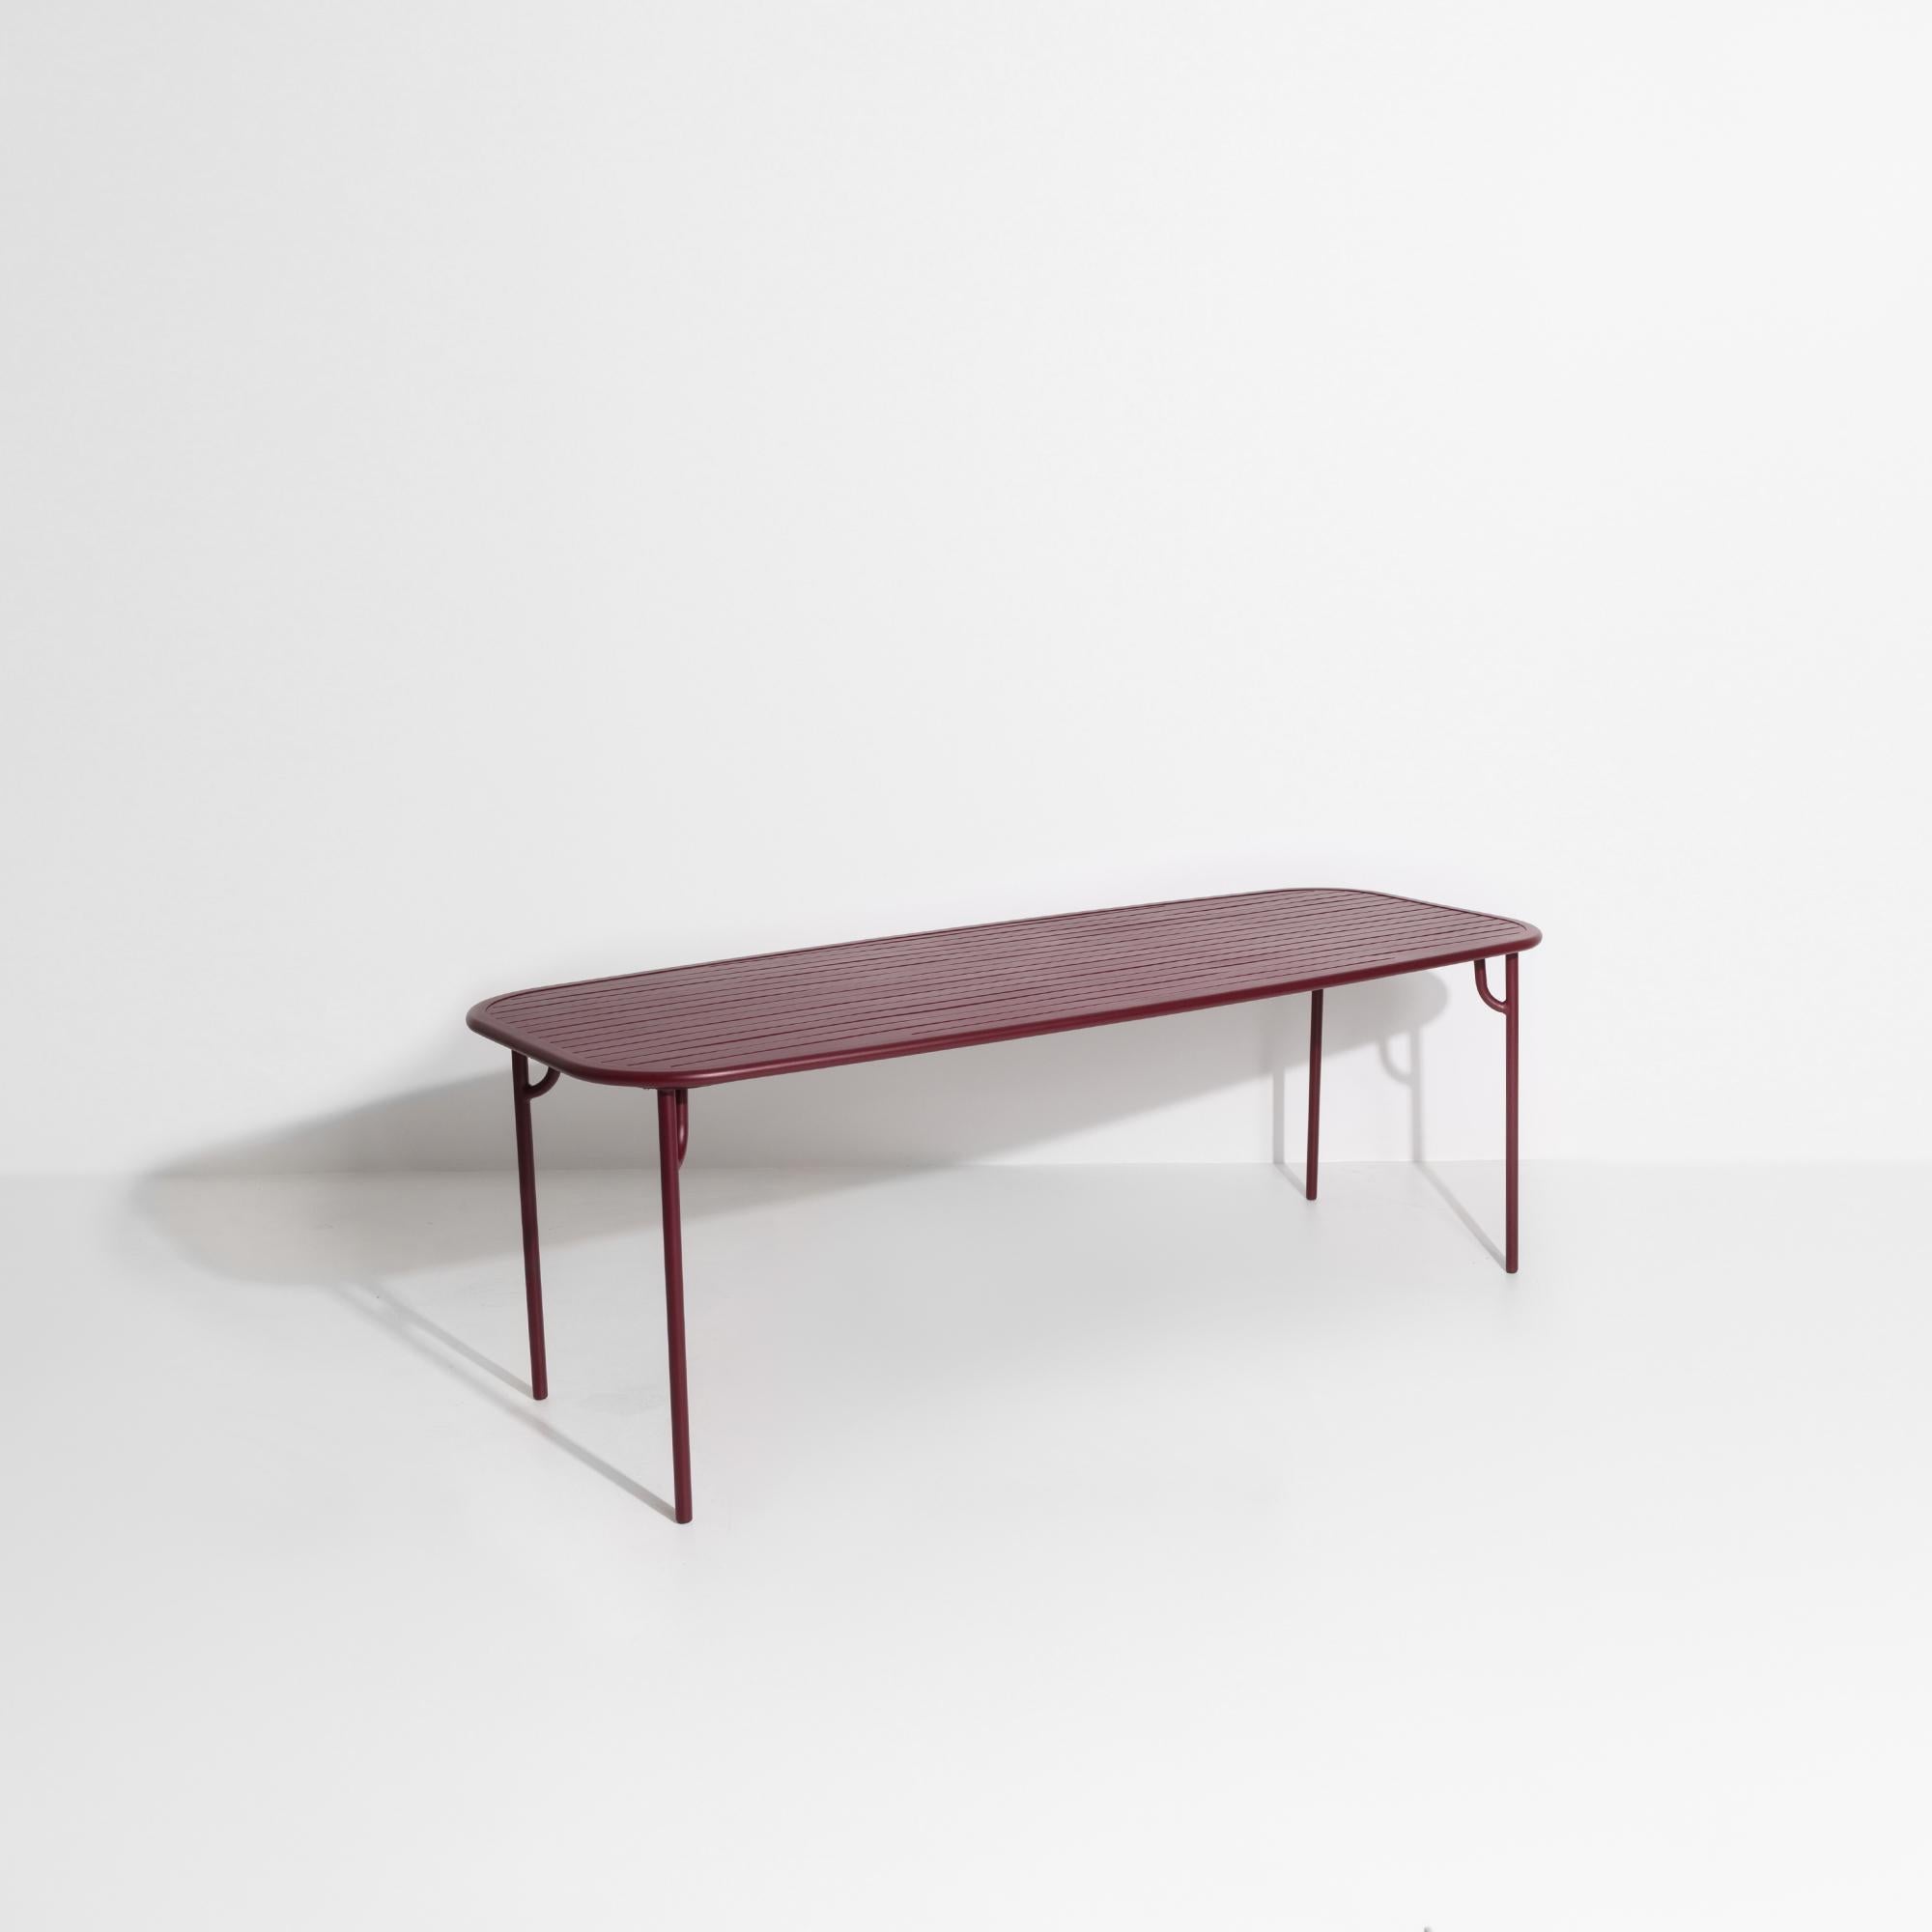 Contemporary Petite Friture Week-End Large Rectangular Dining Table in Burgundy with Slats  For Sale